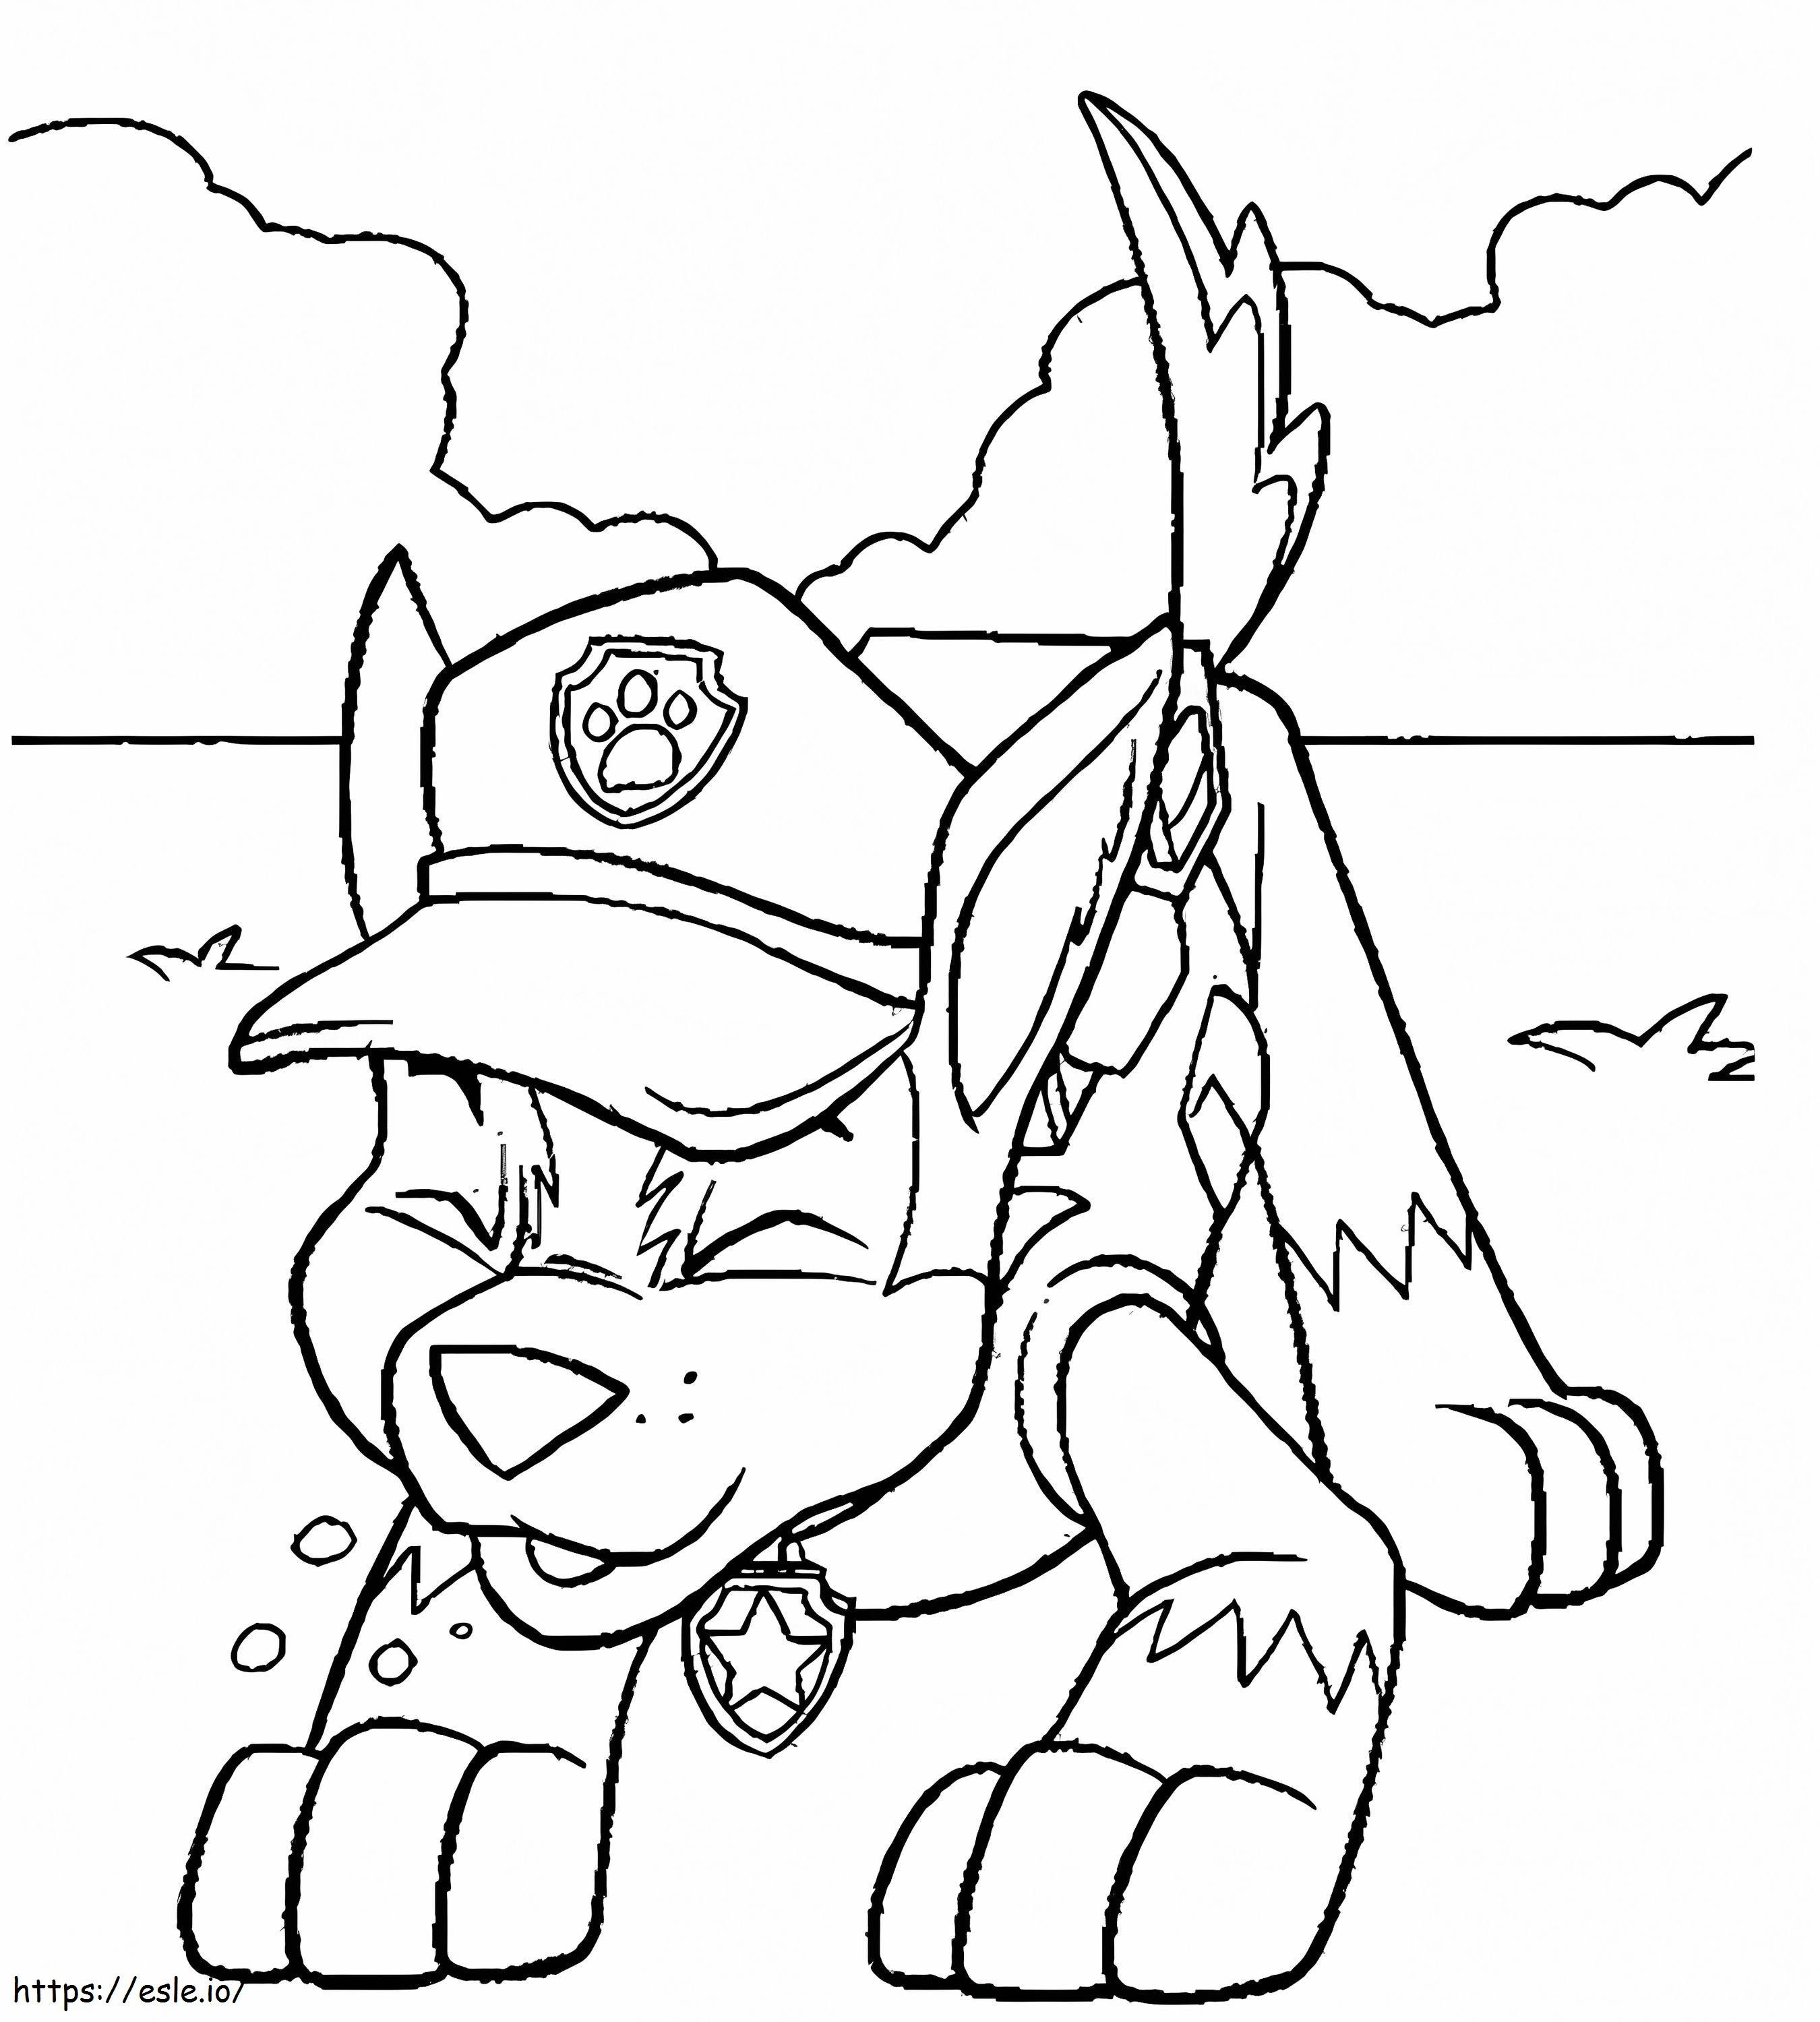 Chase Paw Patrol 38 coloring page